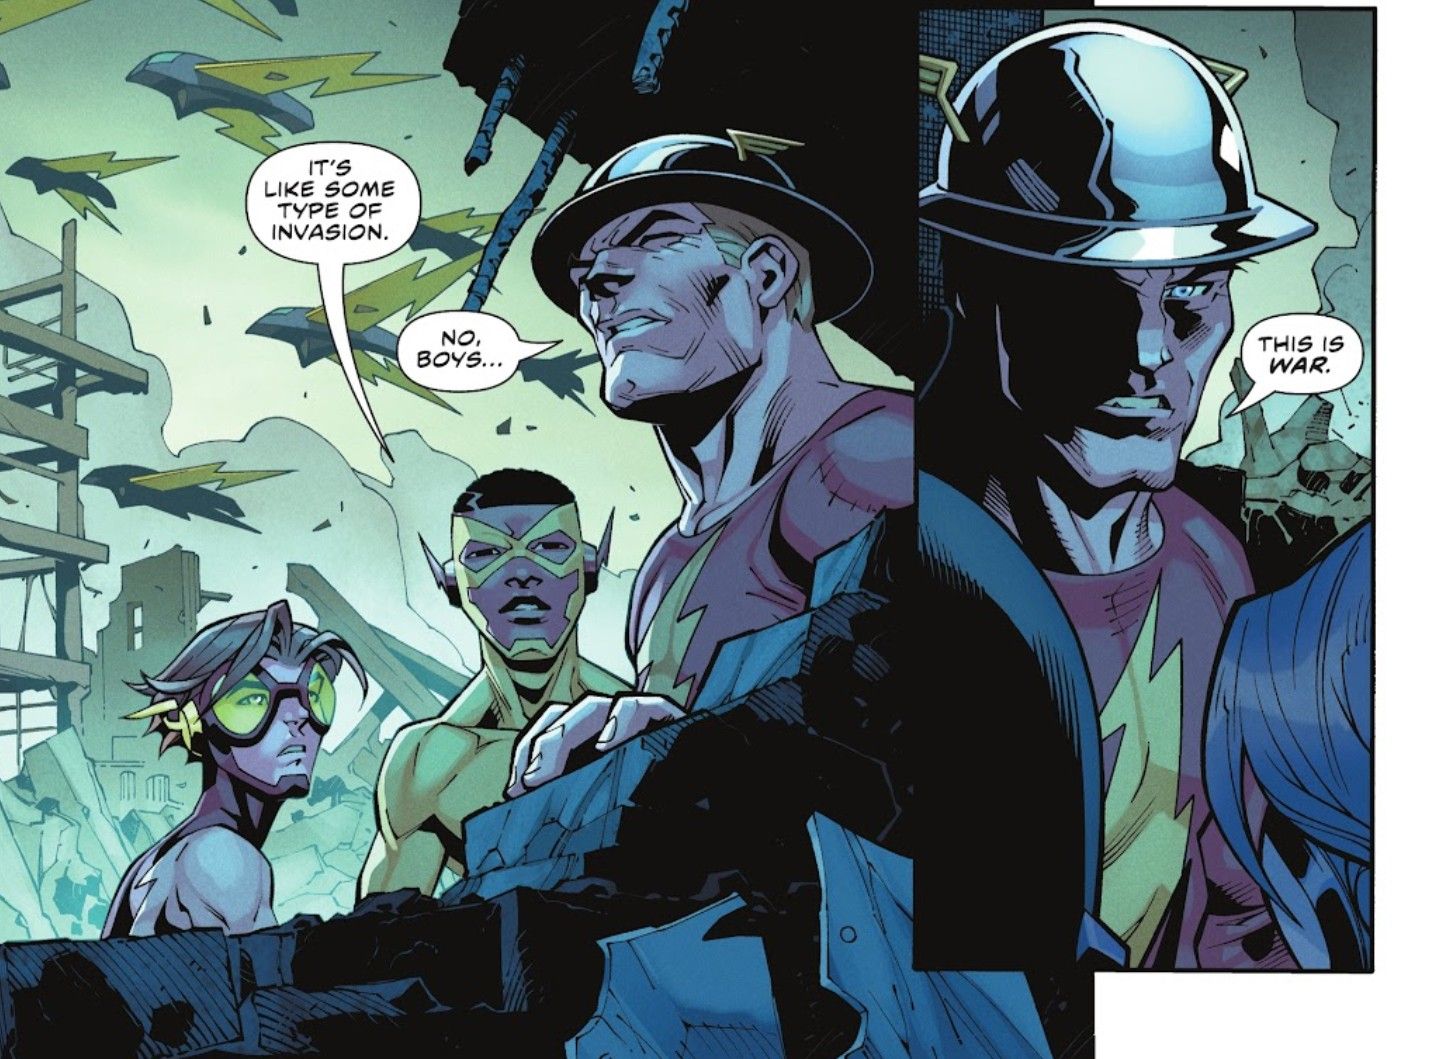 Flash Jay Garrick tells Kid Flash and Impulse that they are at war